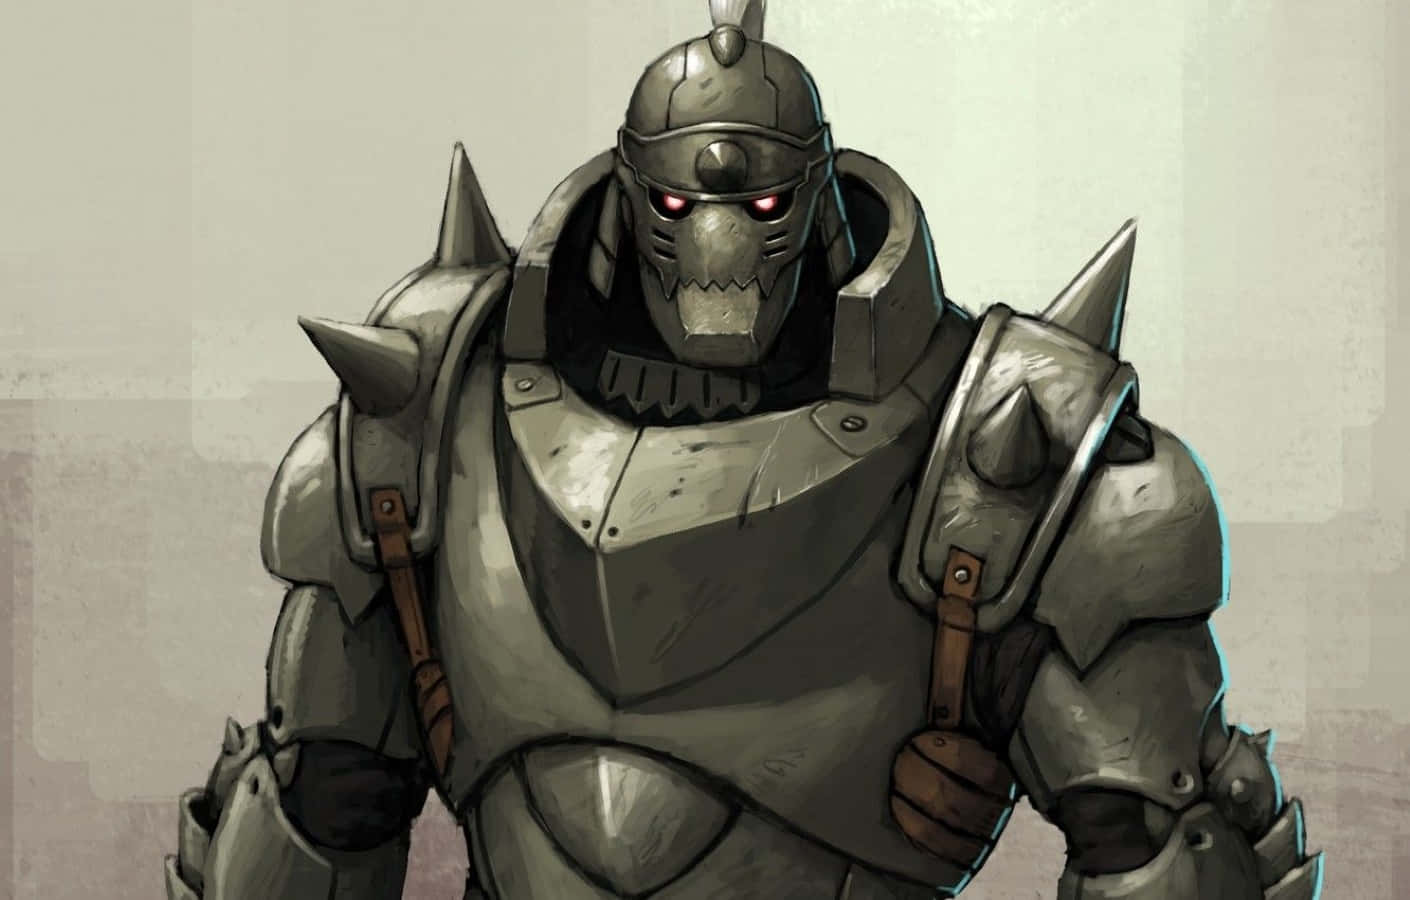 Alphonse Elric ready for battle in his powerful armor Wallpaper